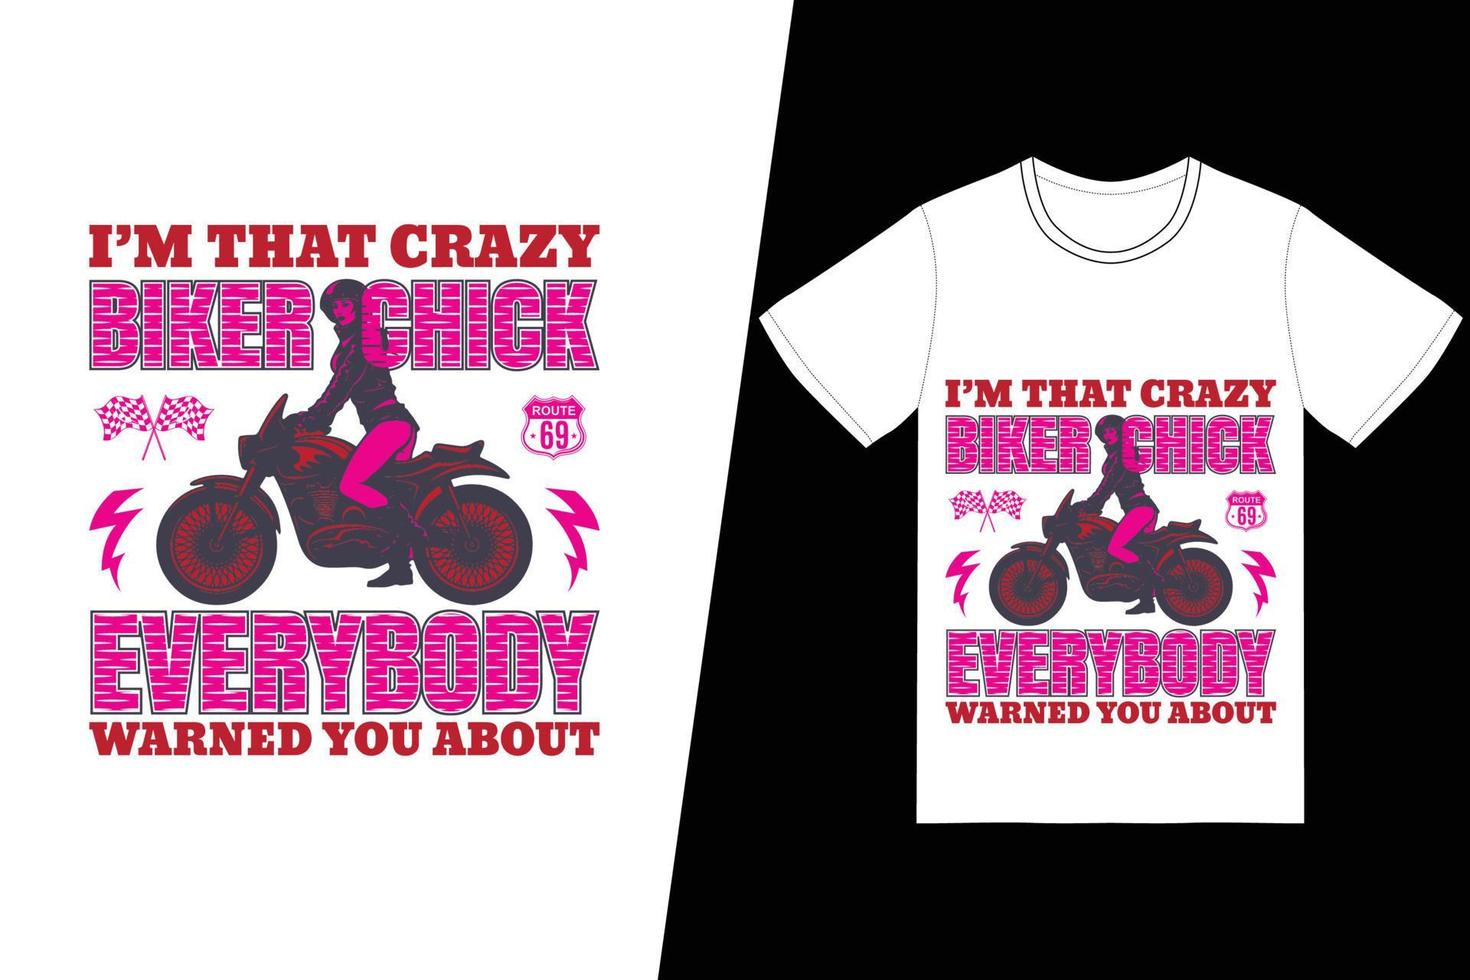 I am that crazy biker chick everybody warned you about t-shirt design. Motorcycle t-shirt design vector. For t-shirt print and other uses. vector